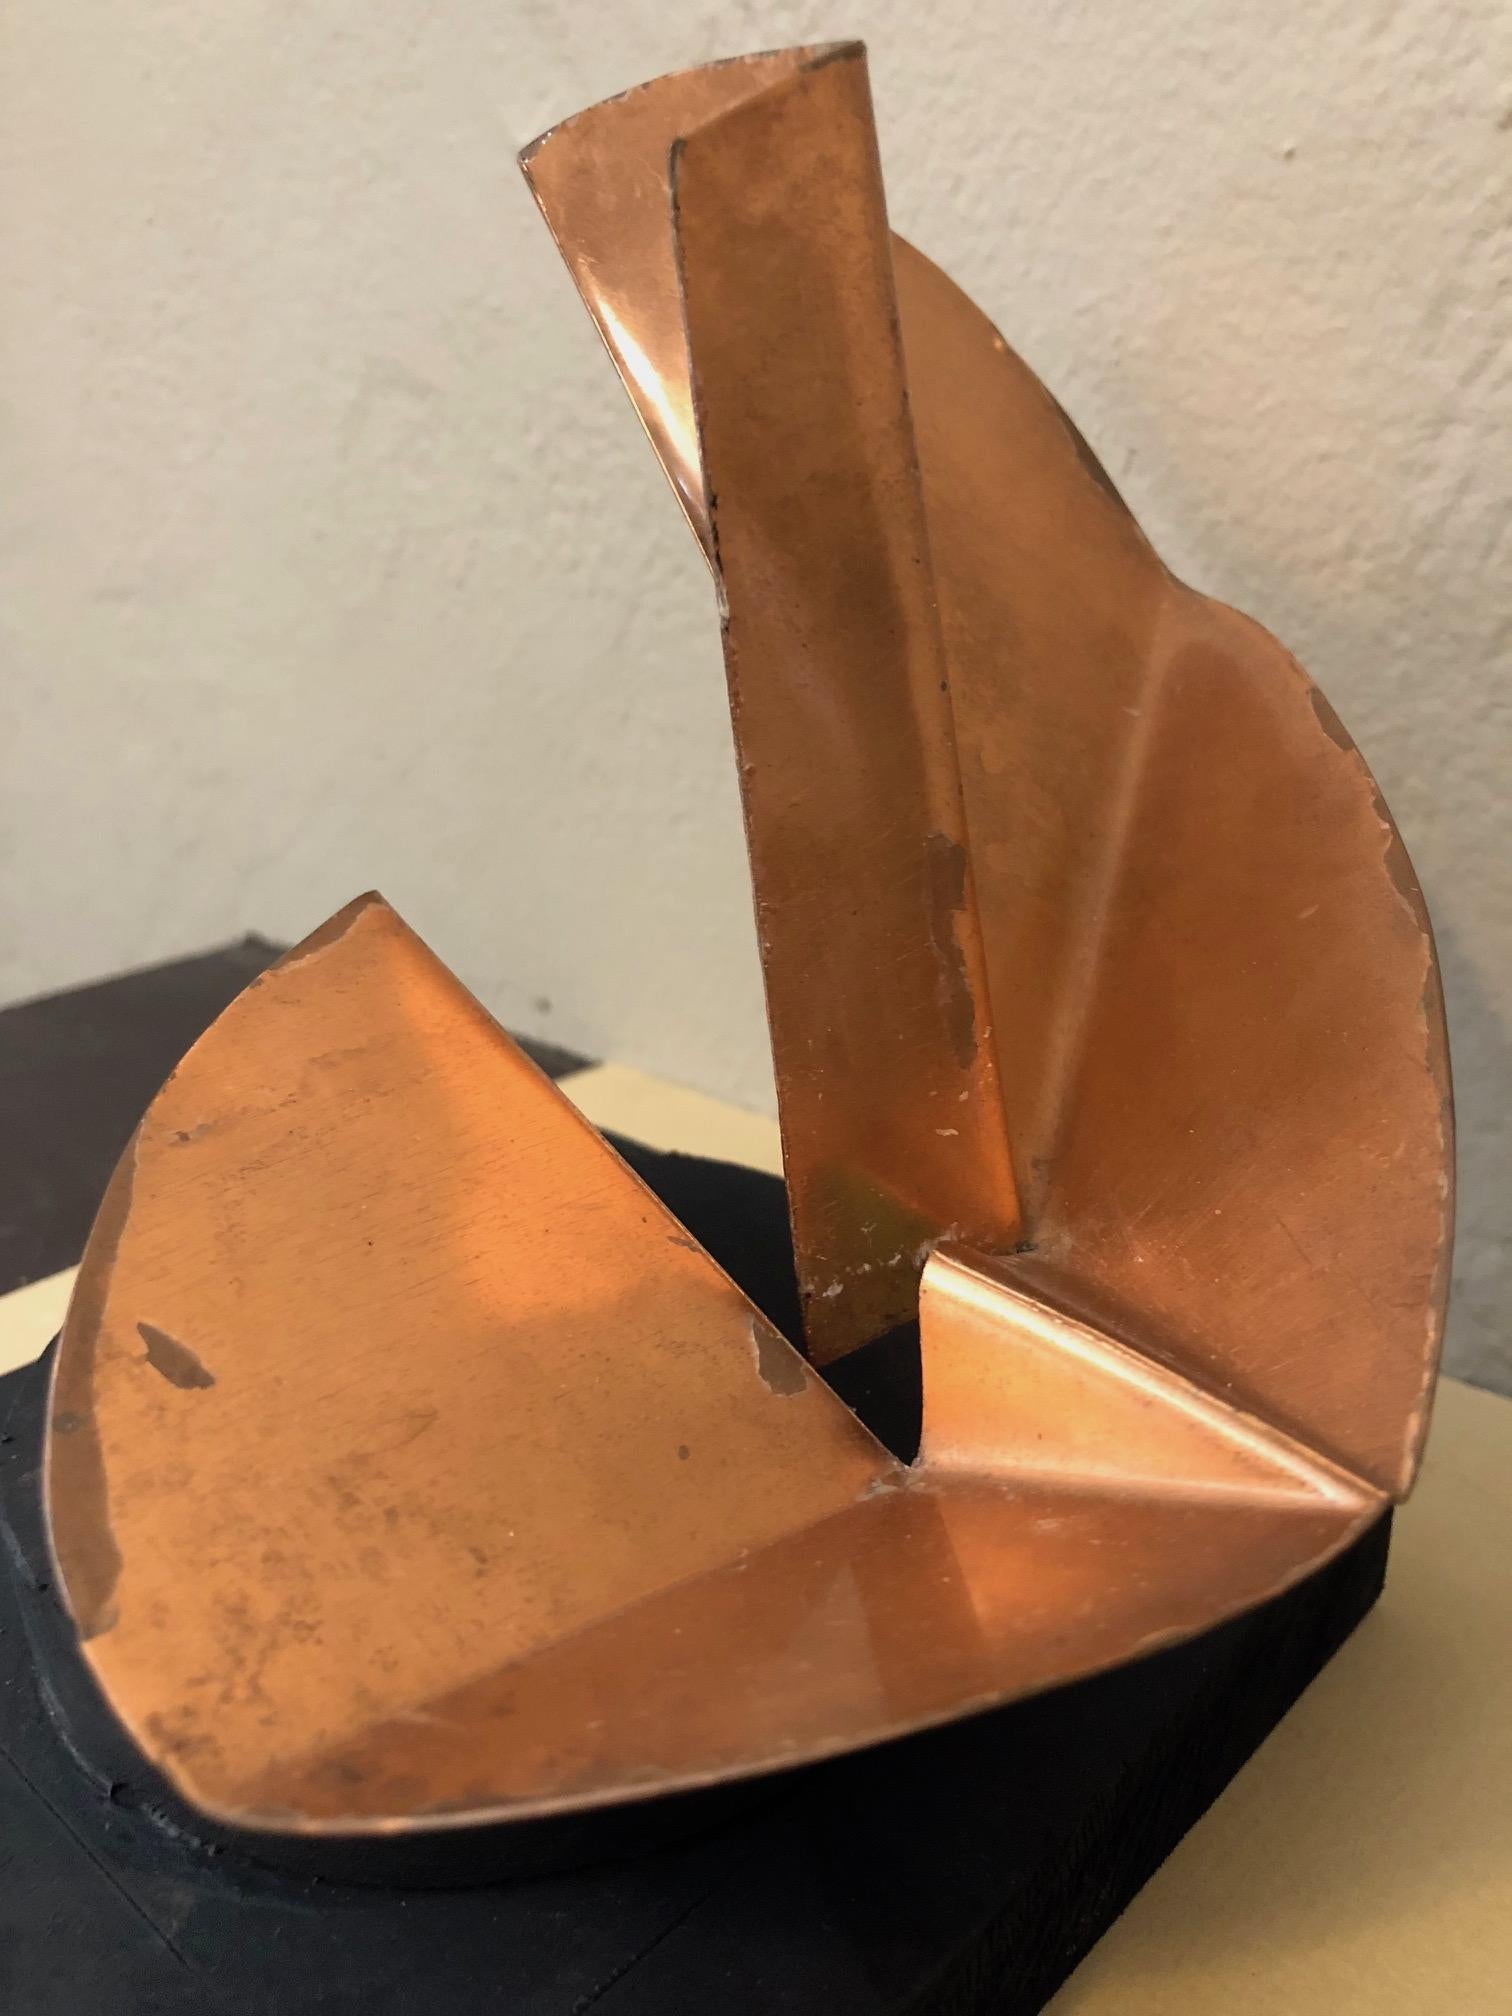 An unusual sculpture circa 1970s by Jerry Meatyard (1929-2016). A note about the artist- Jerry Meatyard earned a bachelor's degree from Illinois Weslean University and a master's degree from NYU. A life long art educator and artist, Meatyard served